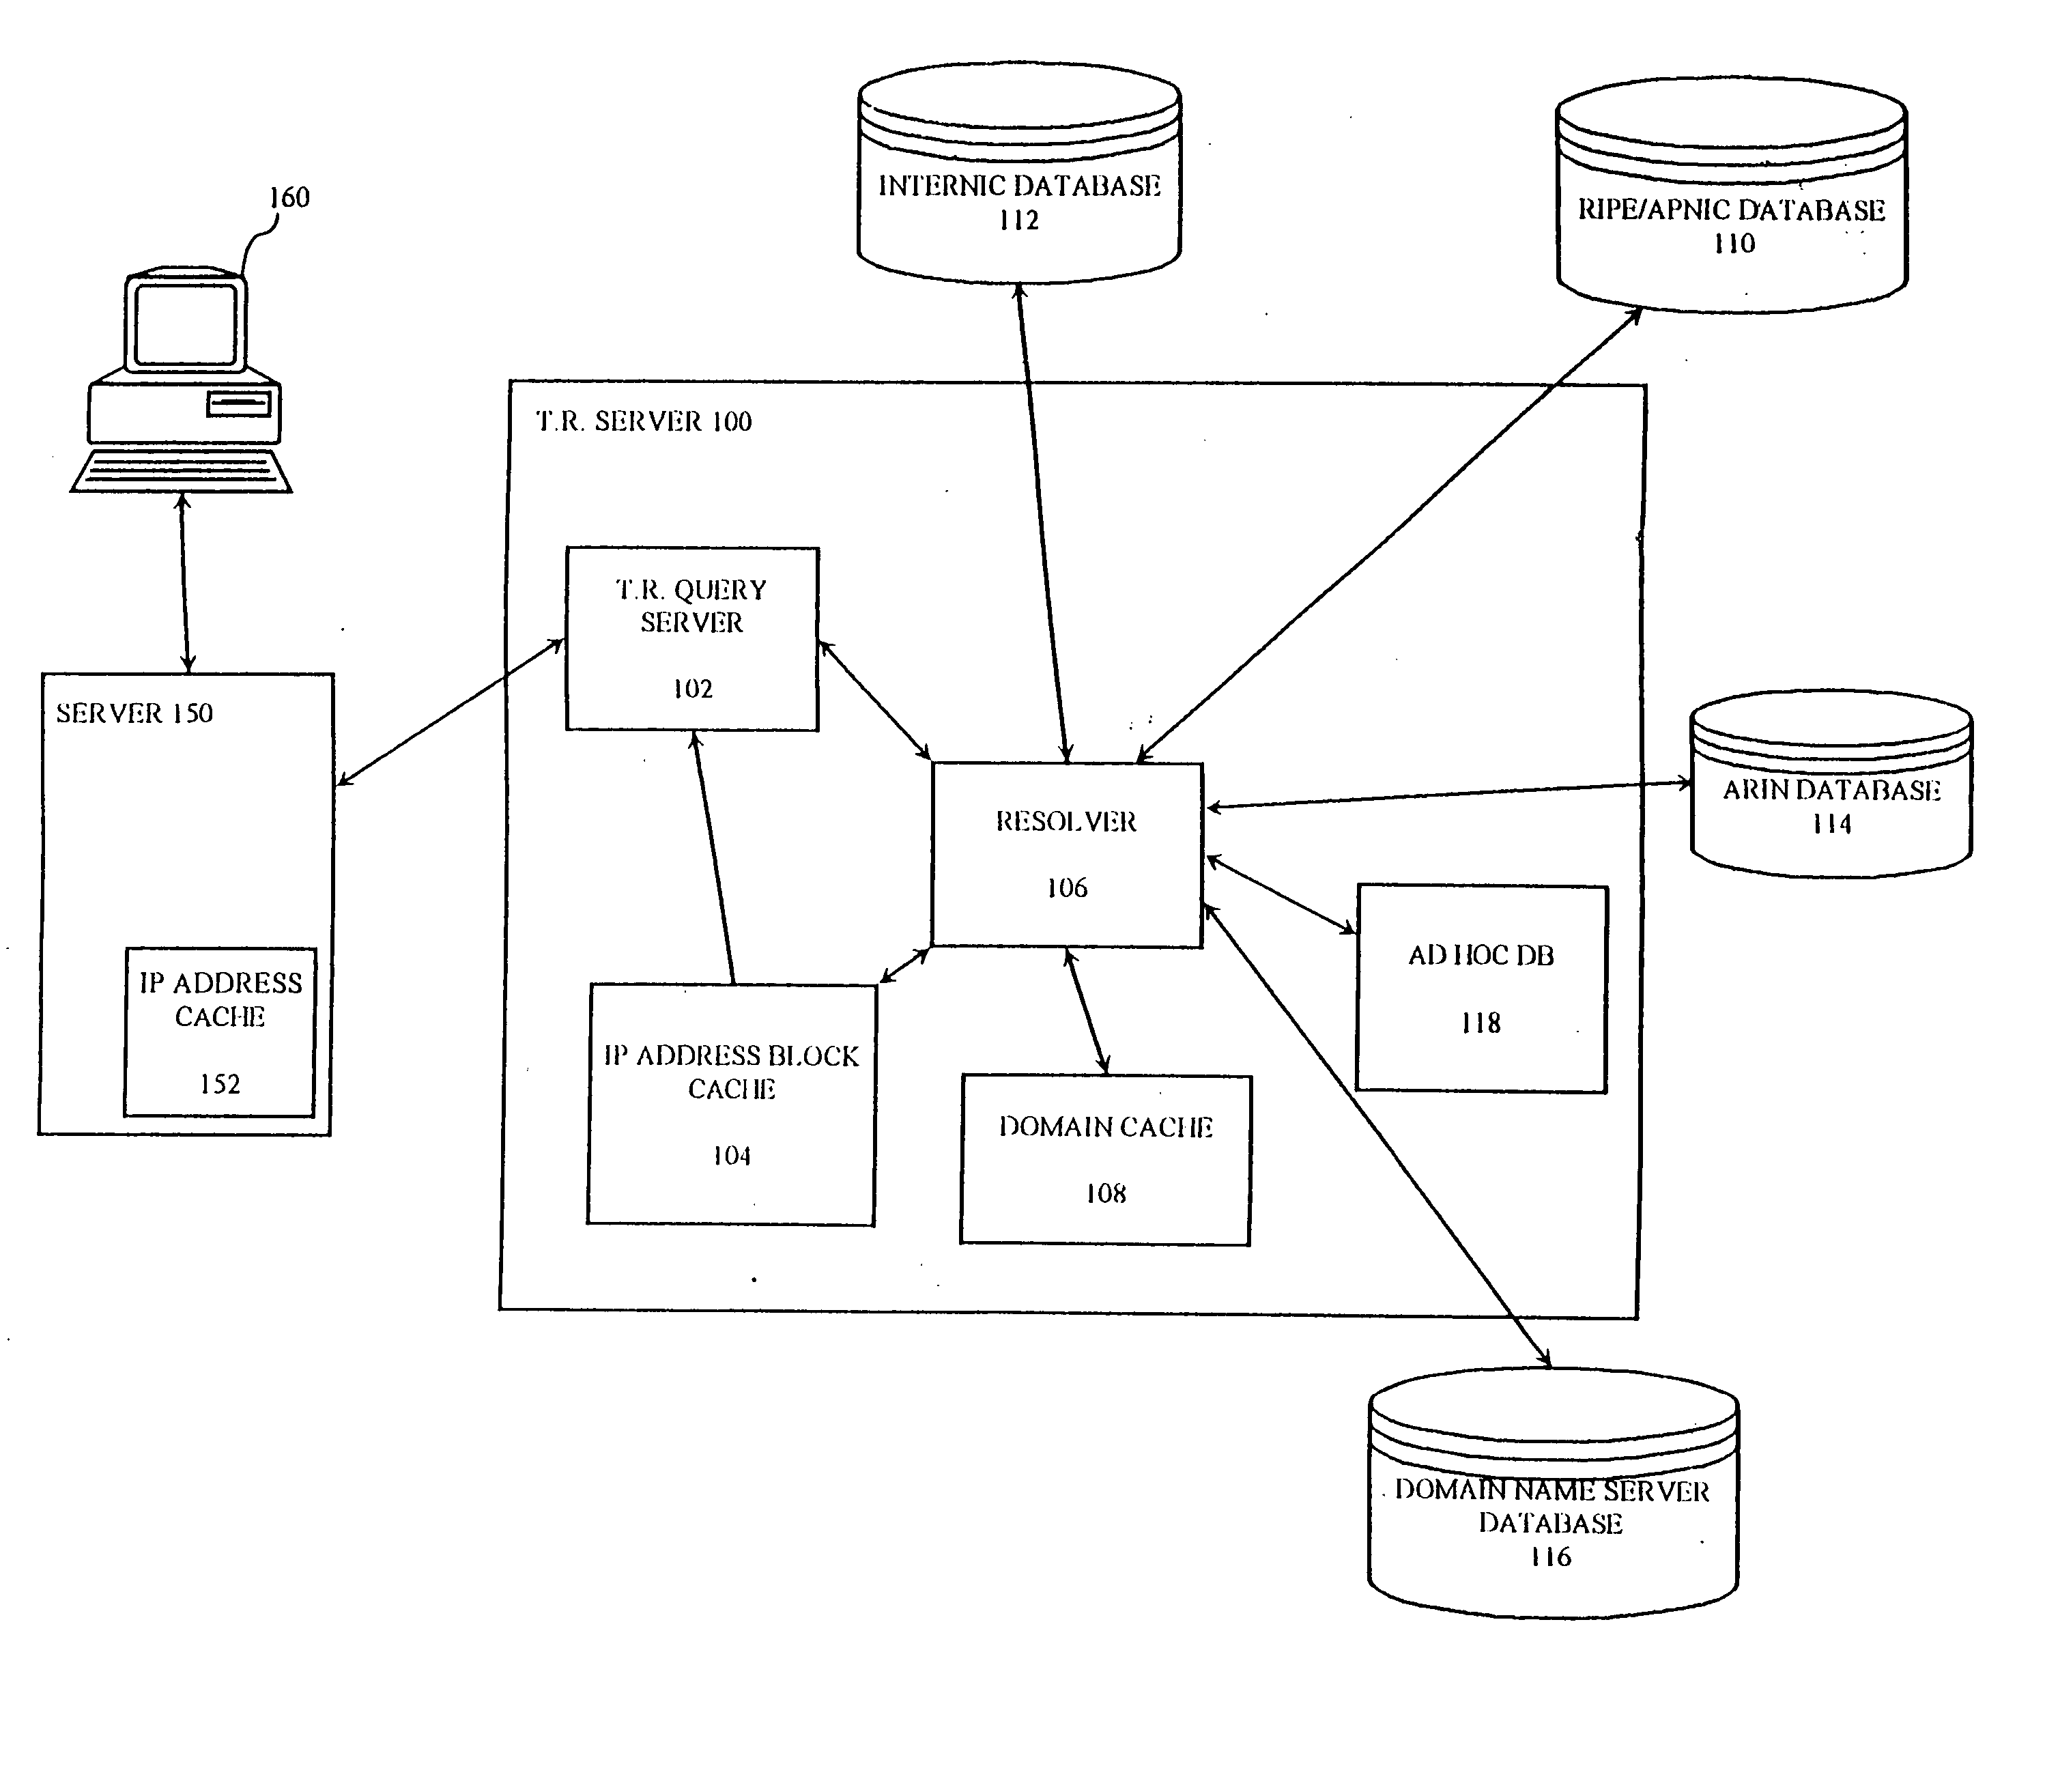 Territorial determination of remote computer location in a wide area network for conditional delivery of digitized products